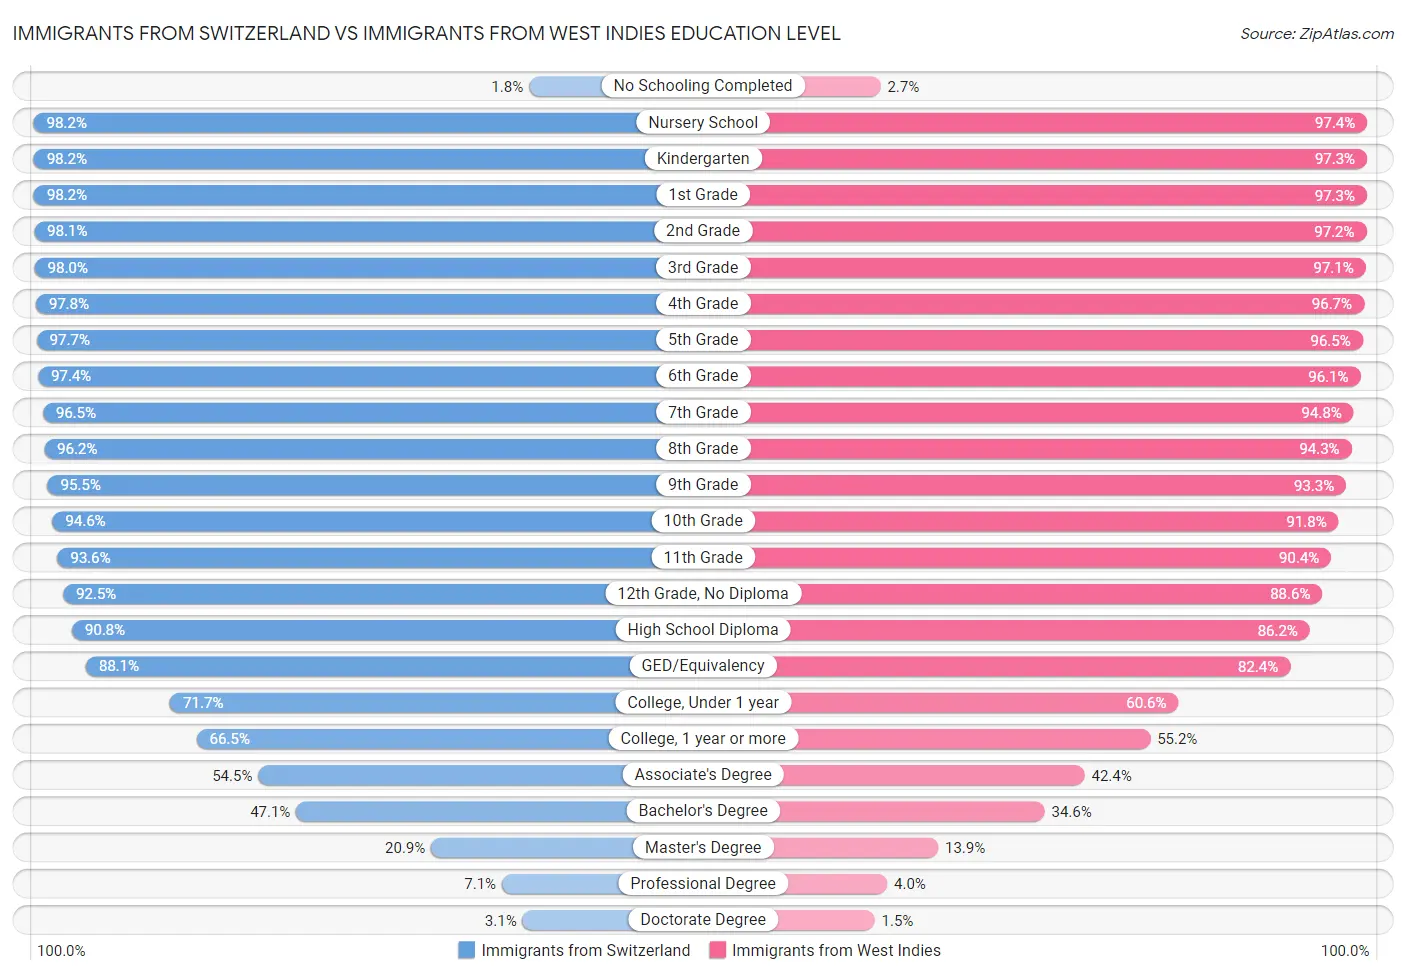 Immigrants from Switzerland vs Immigrants from West Indies Education Level